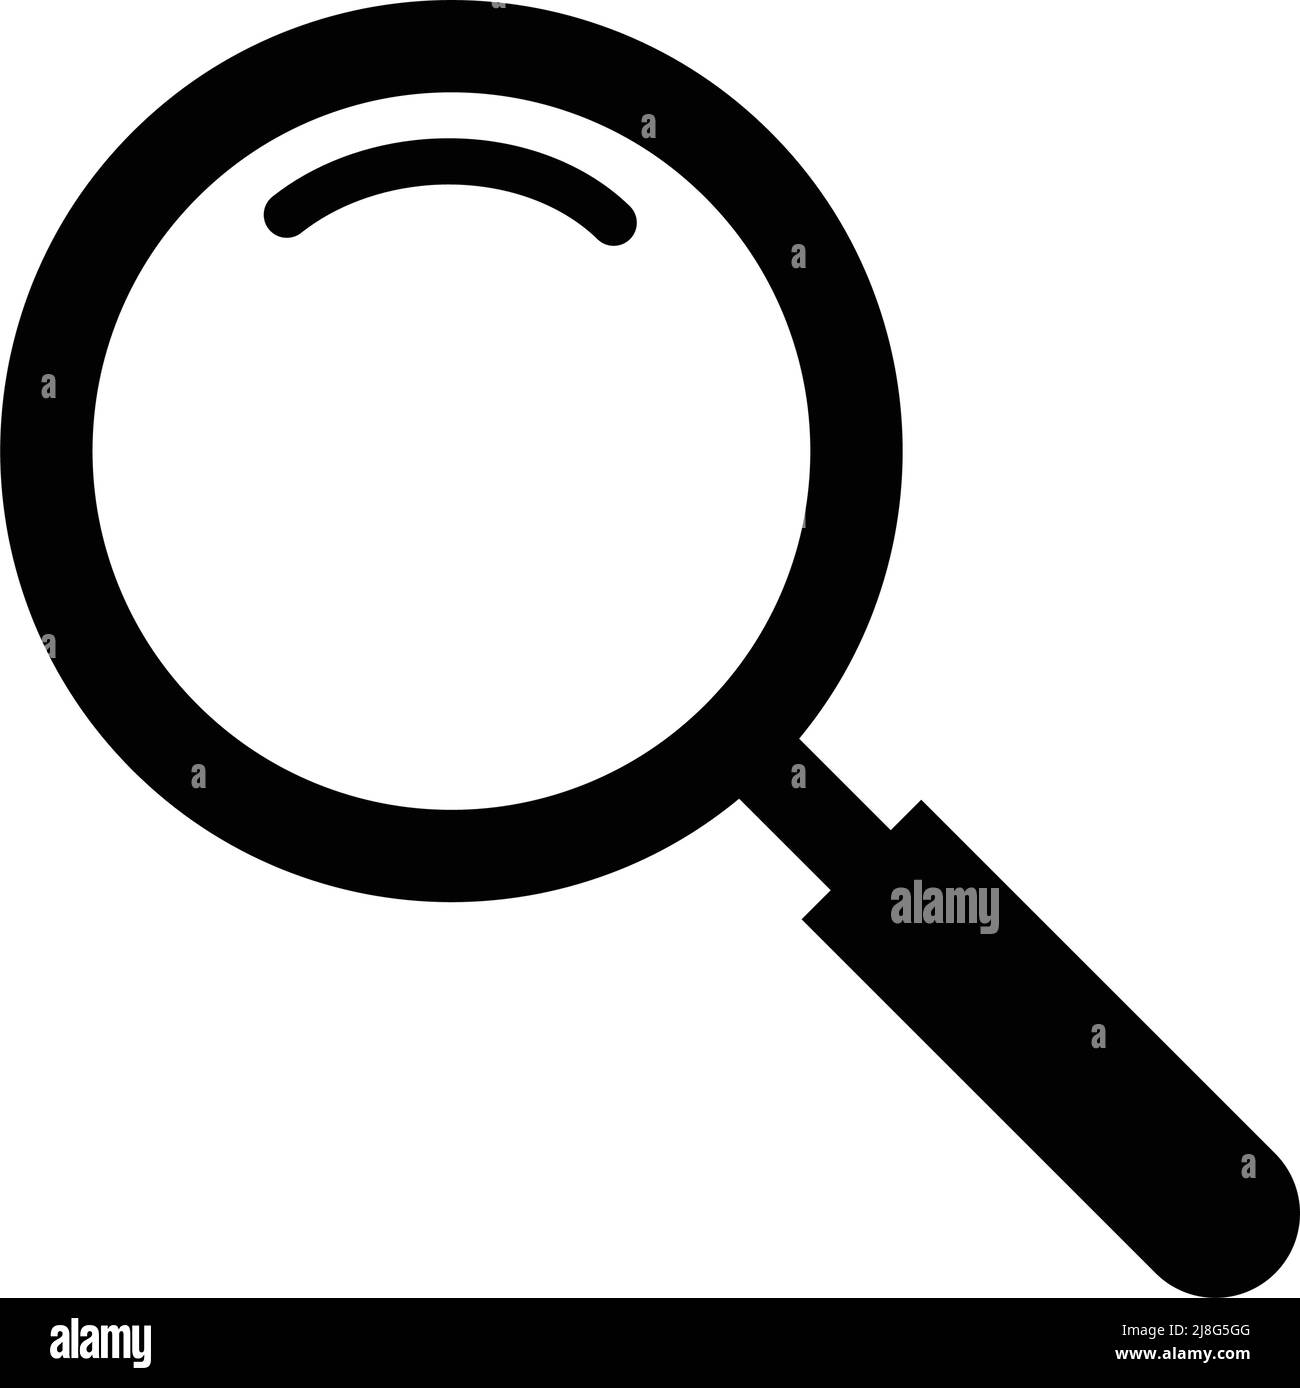 Magnifying silhouette icon in black. Editable vector Stock Vector Image ...